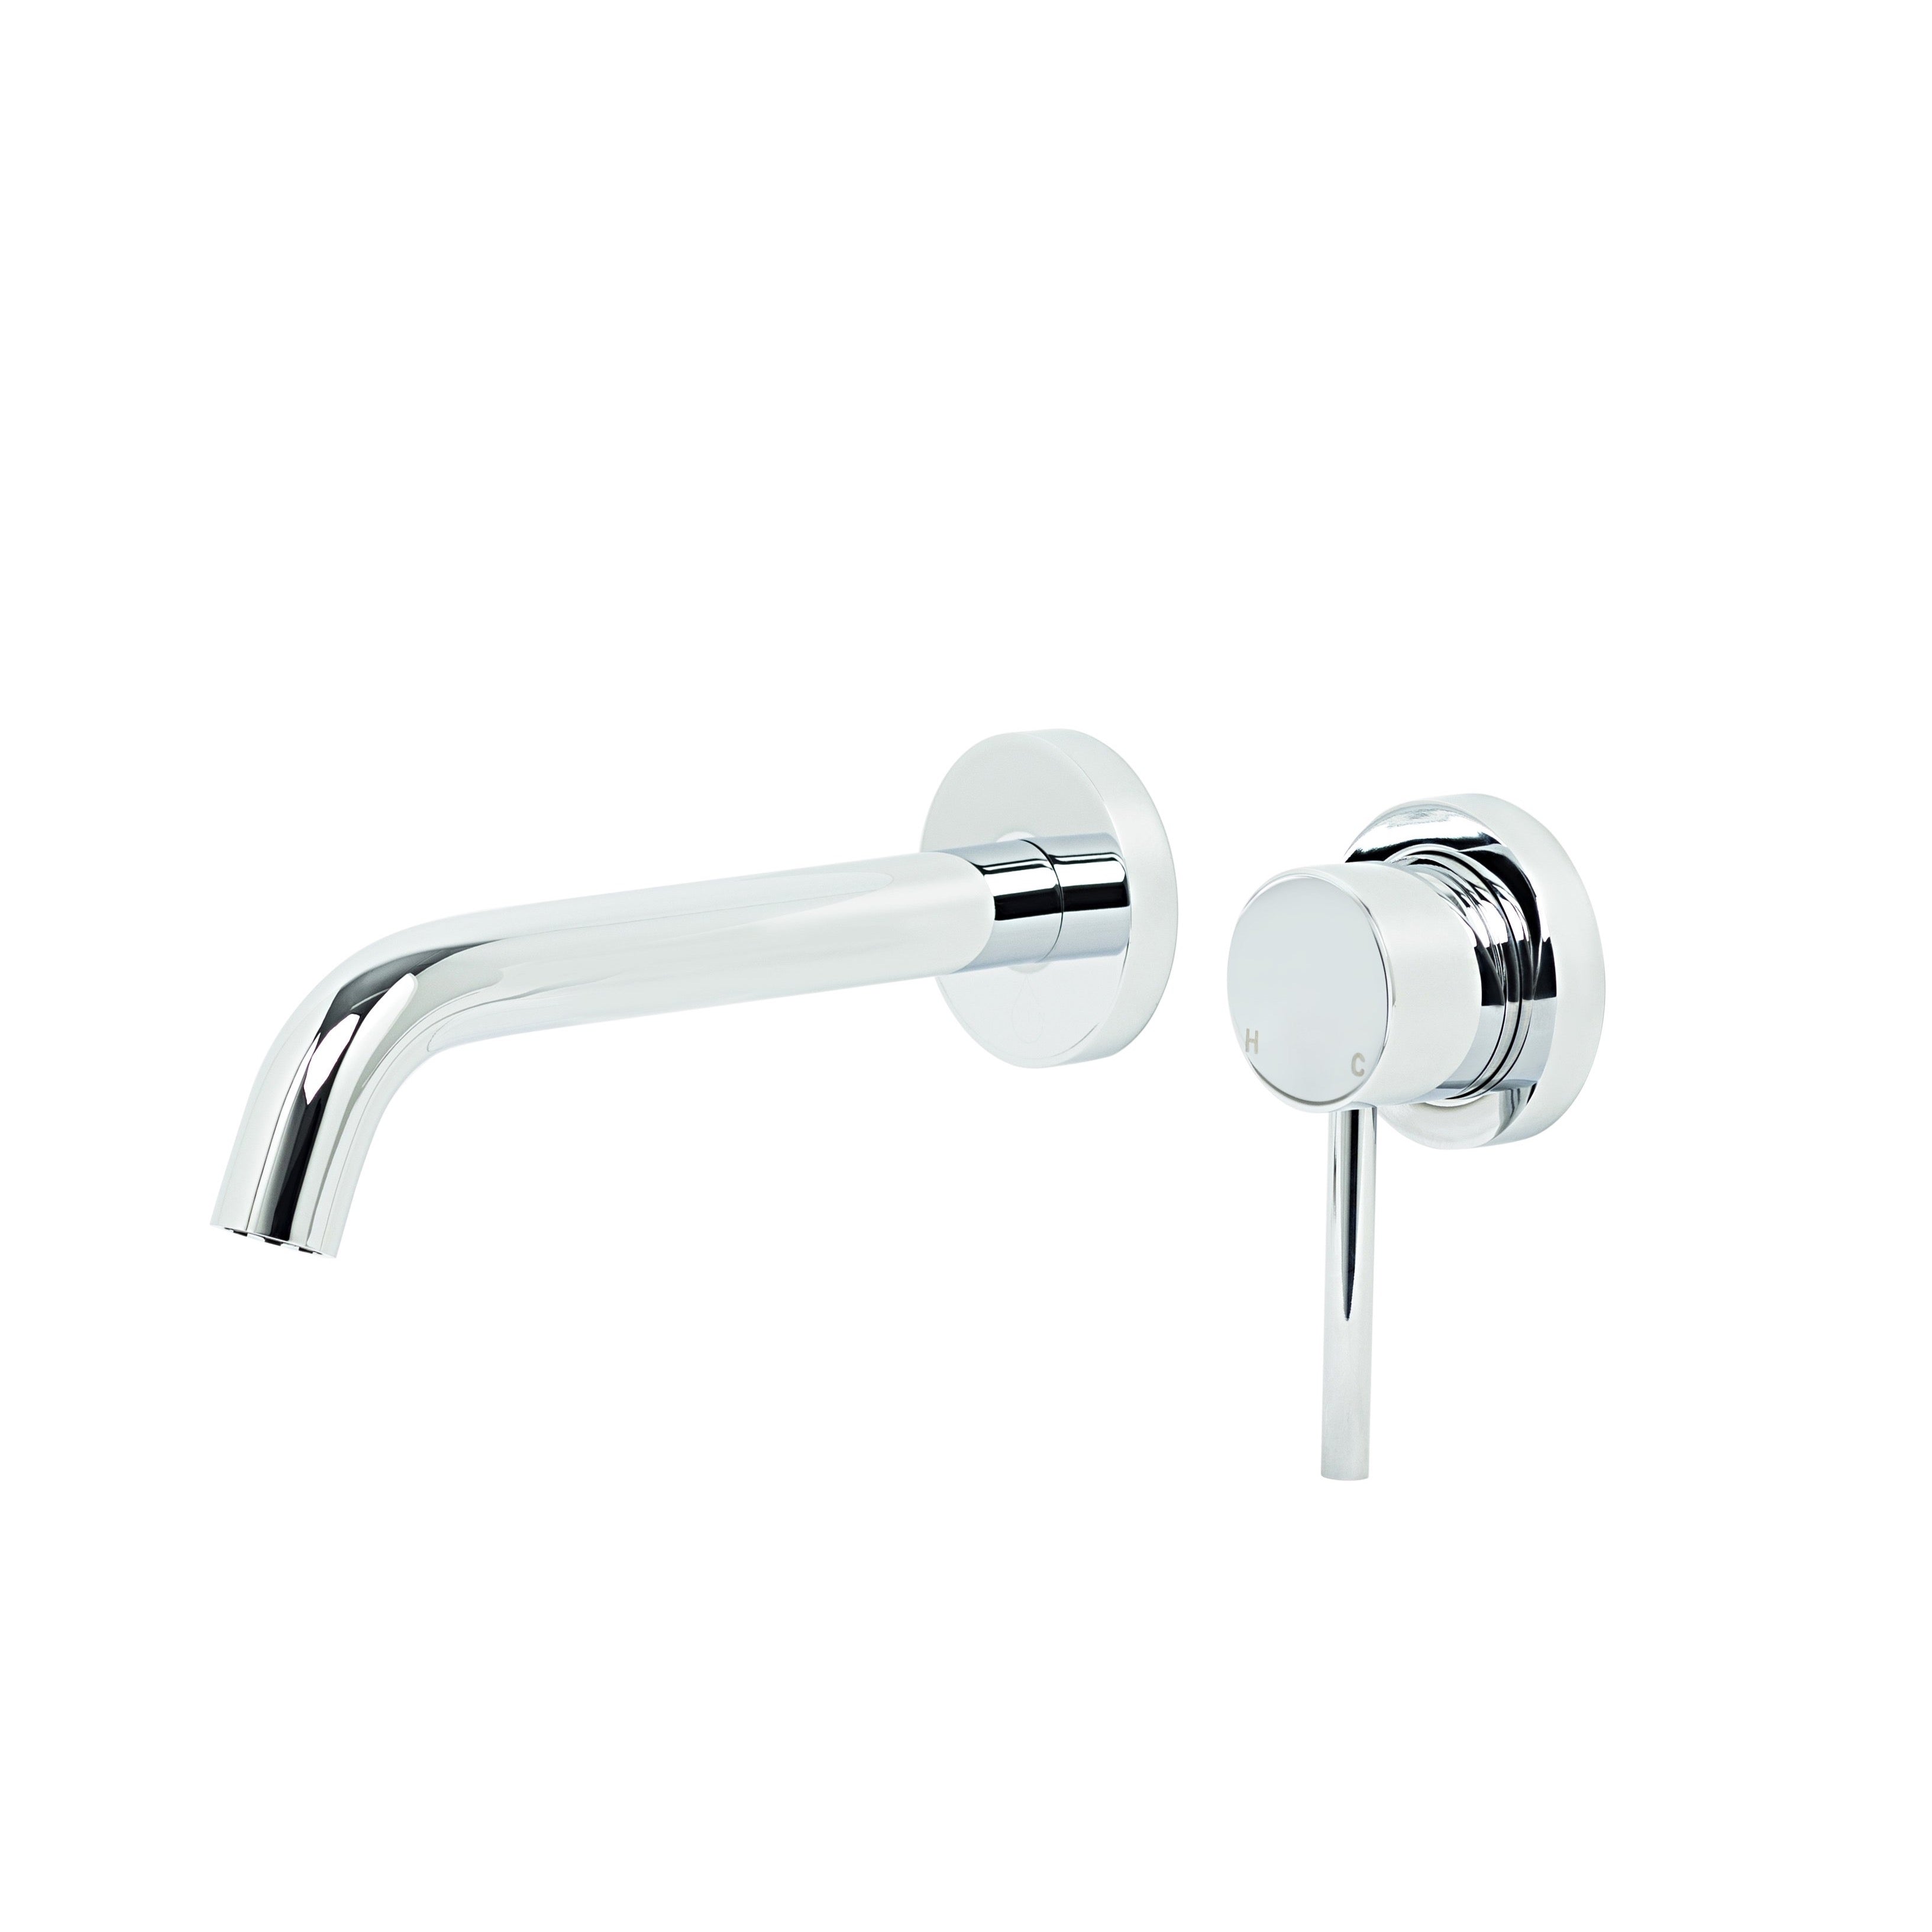 Bondi Pin Lever Wall Mixer Set with Curved Spout in Chrome